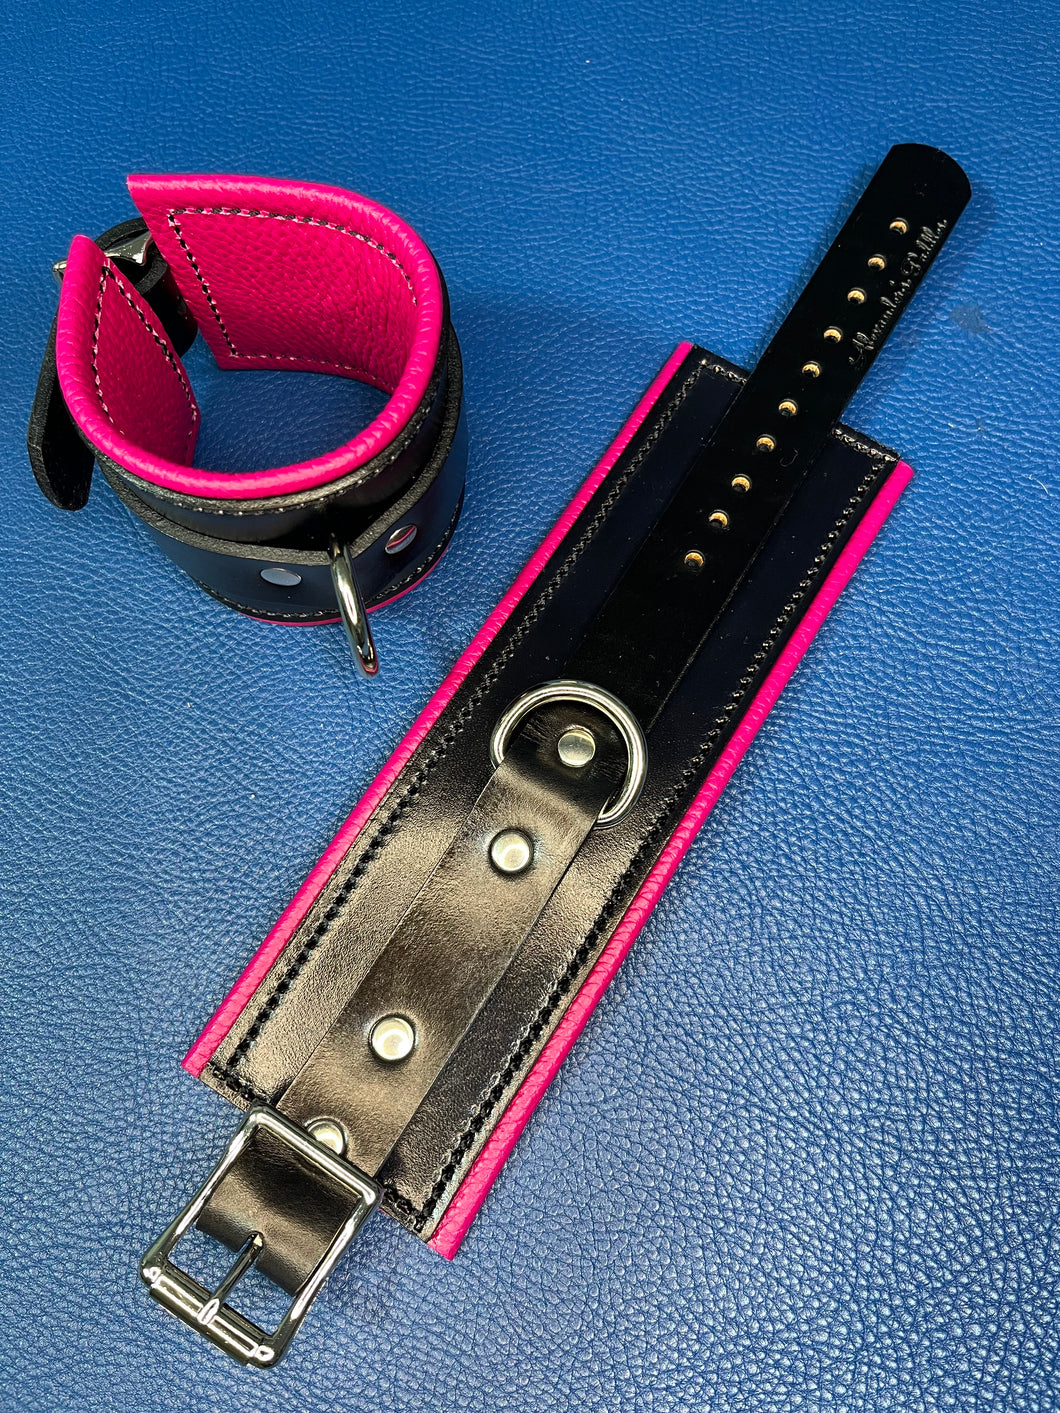 Cuffs: Wrist Cuffs in Pink and Black Leather, one pair